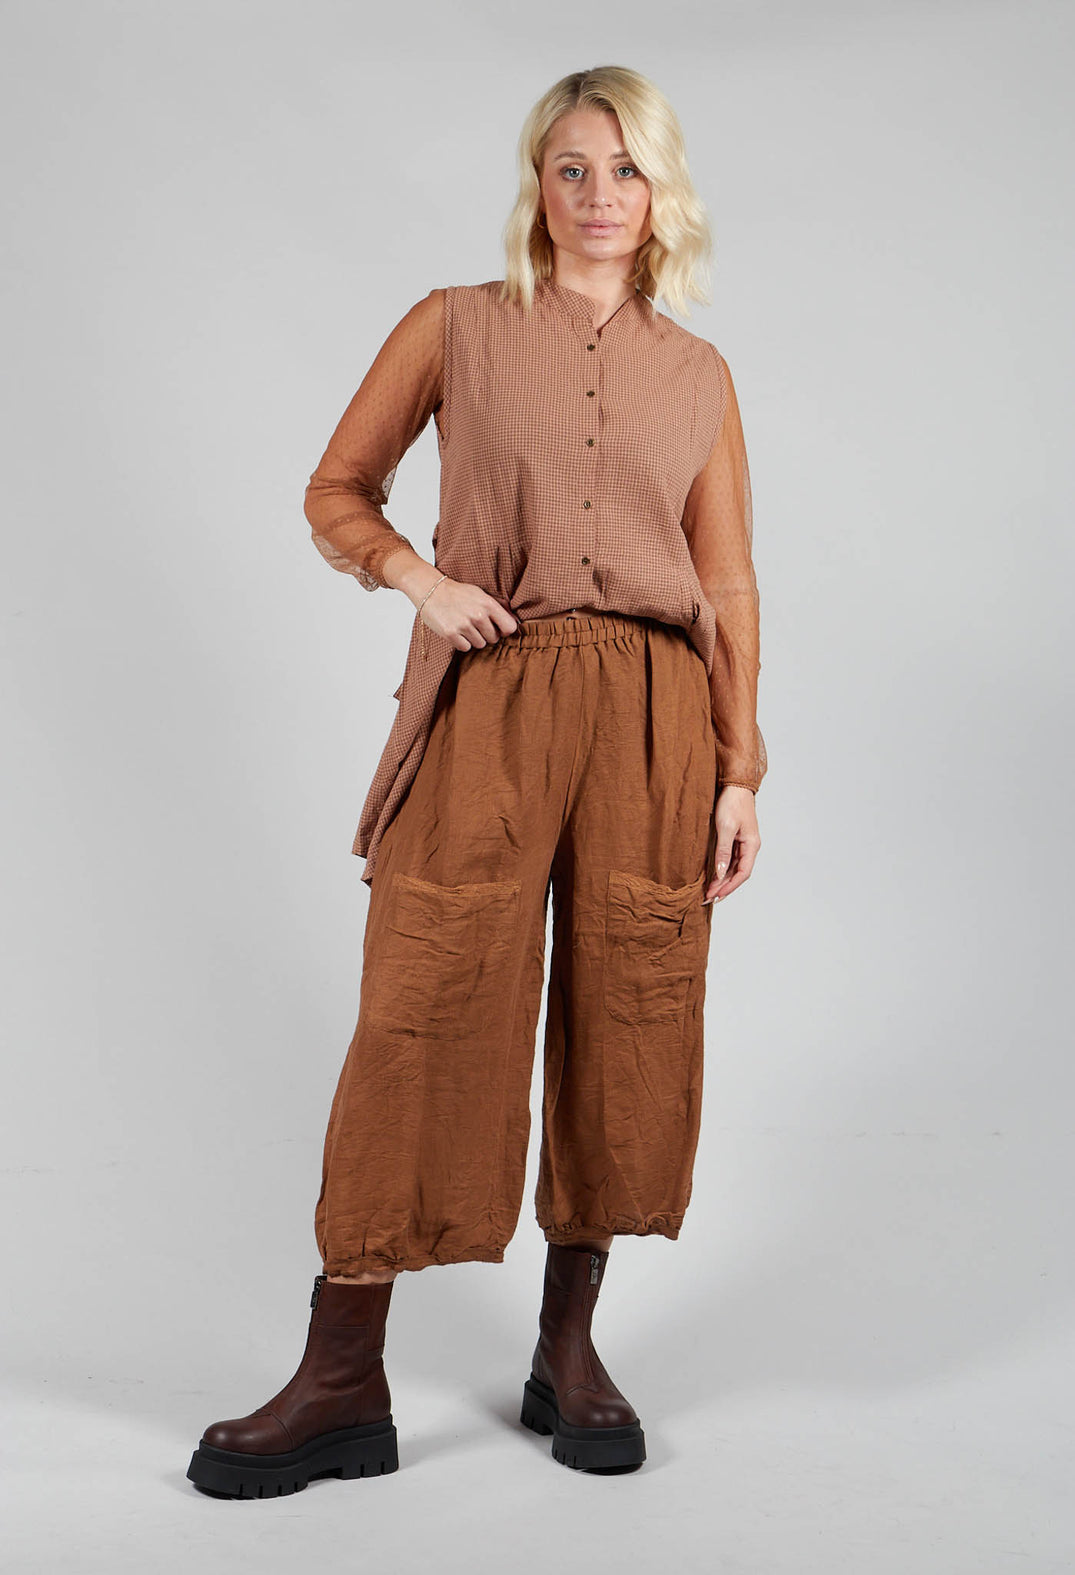 Gus Trousers in Canelle